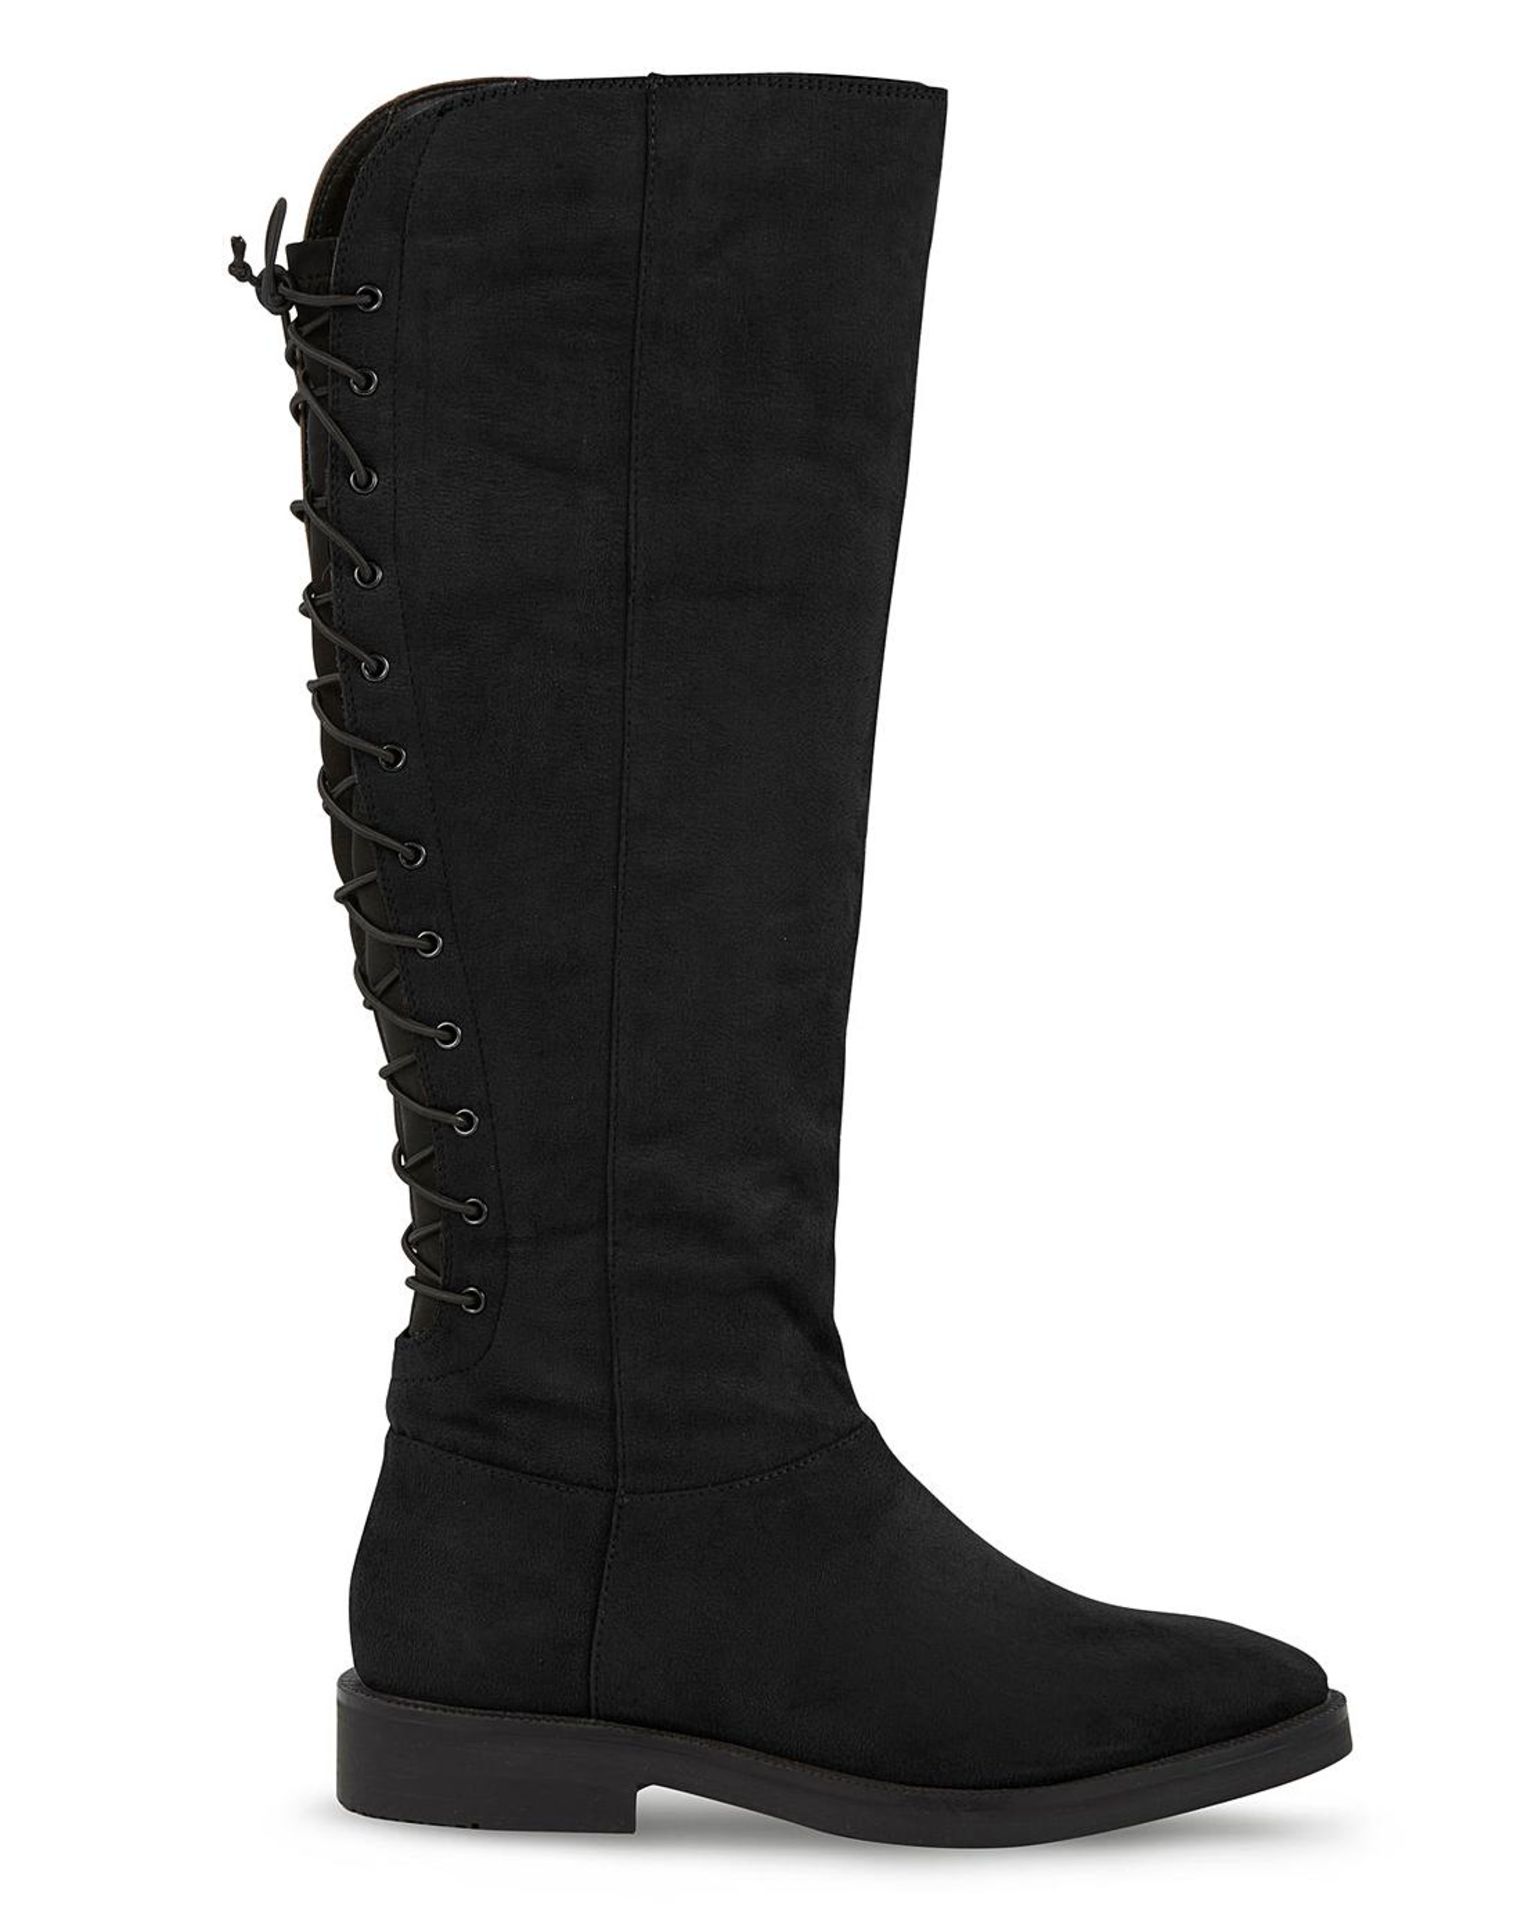 Katniss High Leg Boots Wide Fit Super Curvy Calf SIZE 7 RRP £55Condition ReportAppraisal Available